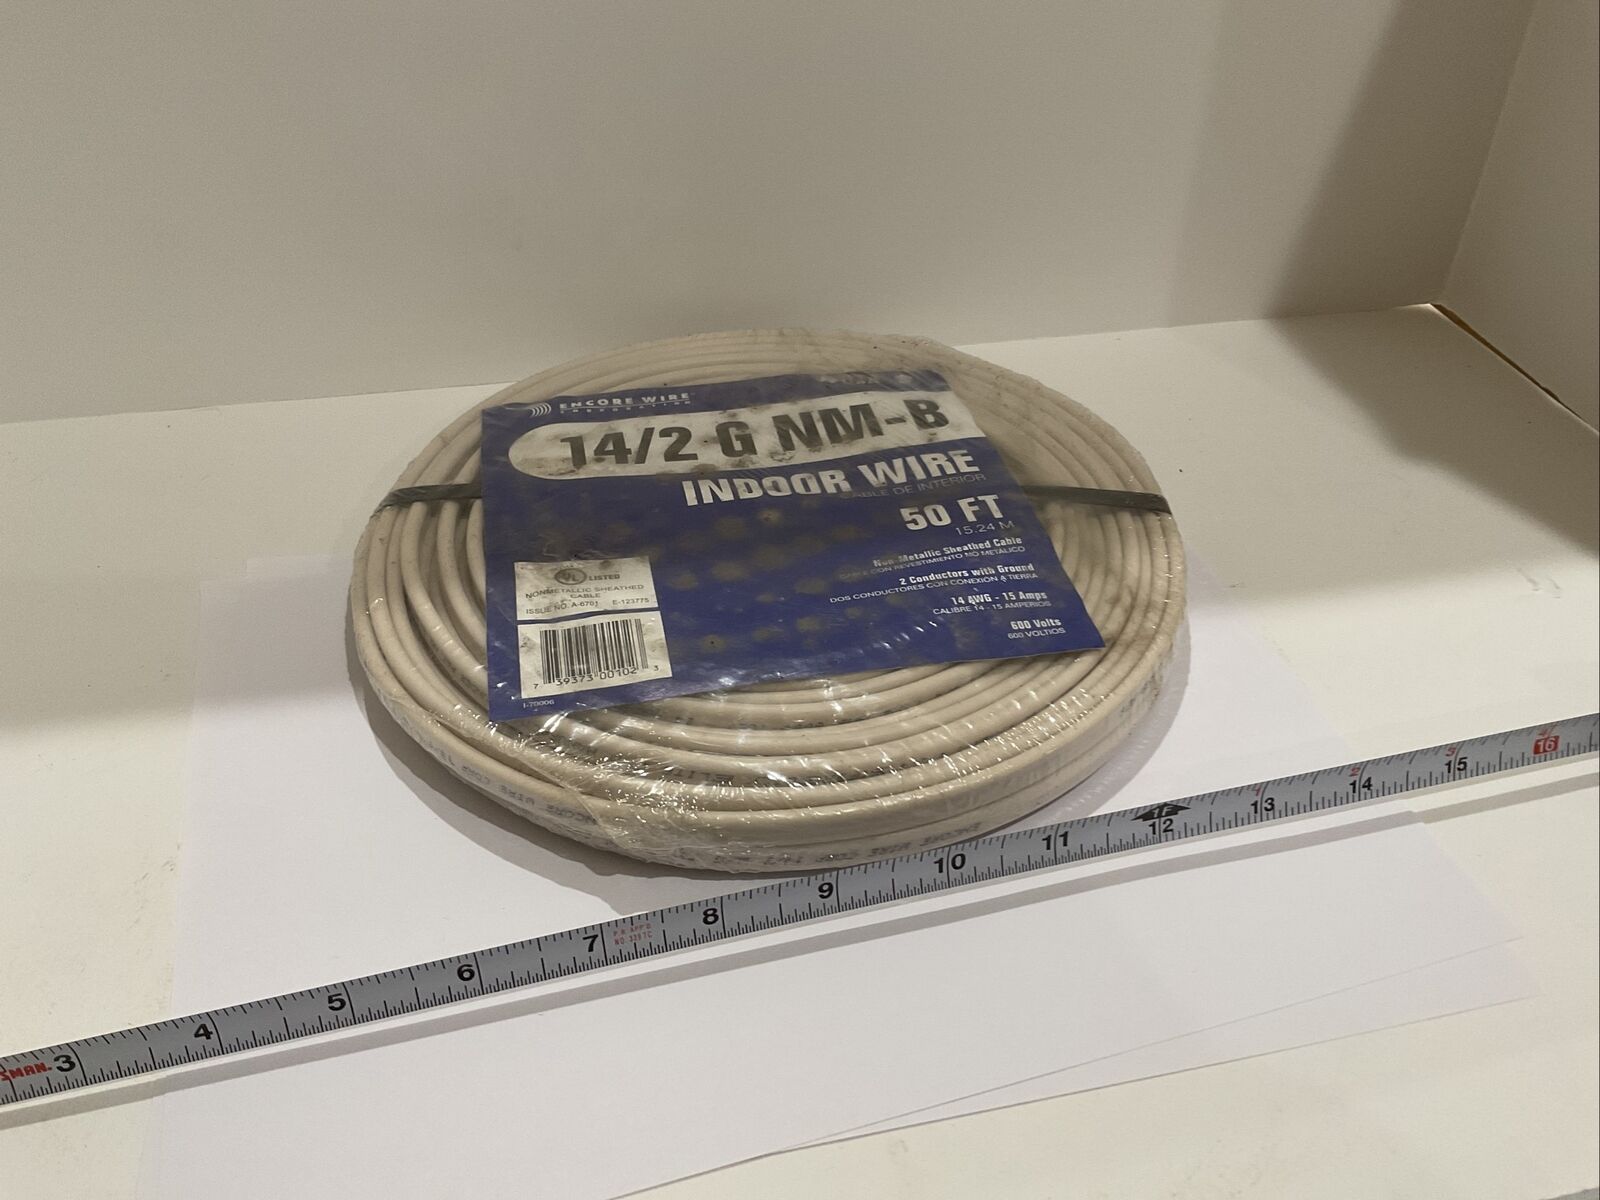 Encore Wire 14/2 G NM-B 50ft 14awg 15 Amps New Surplus 